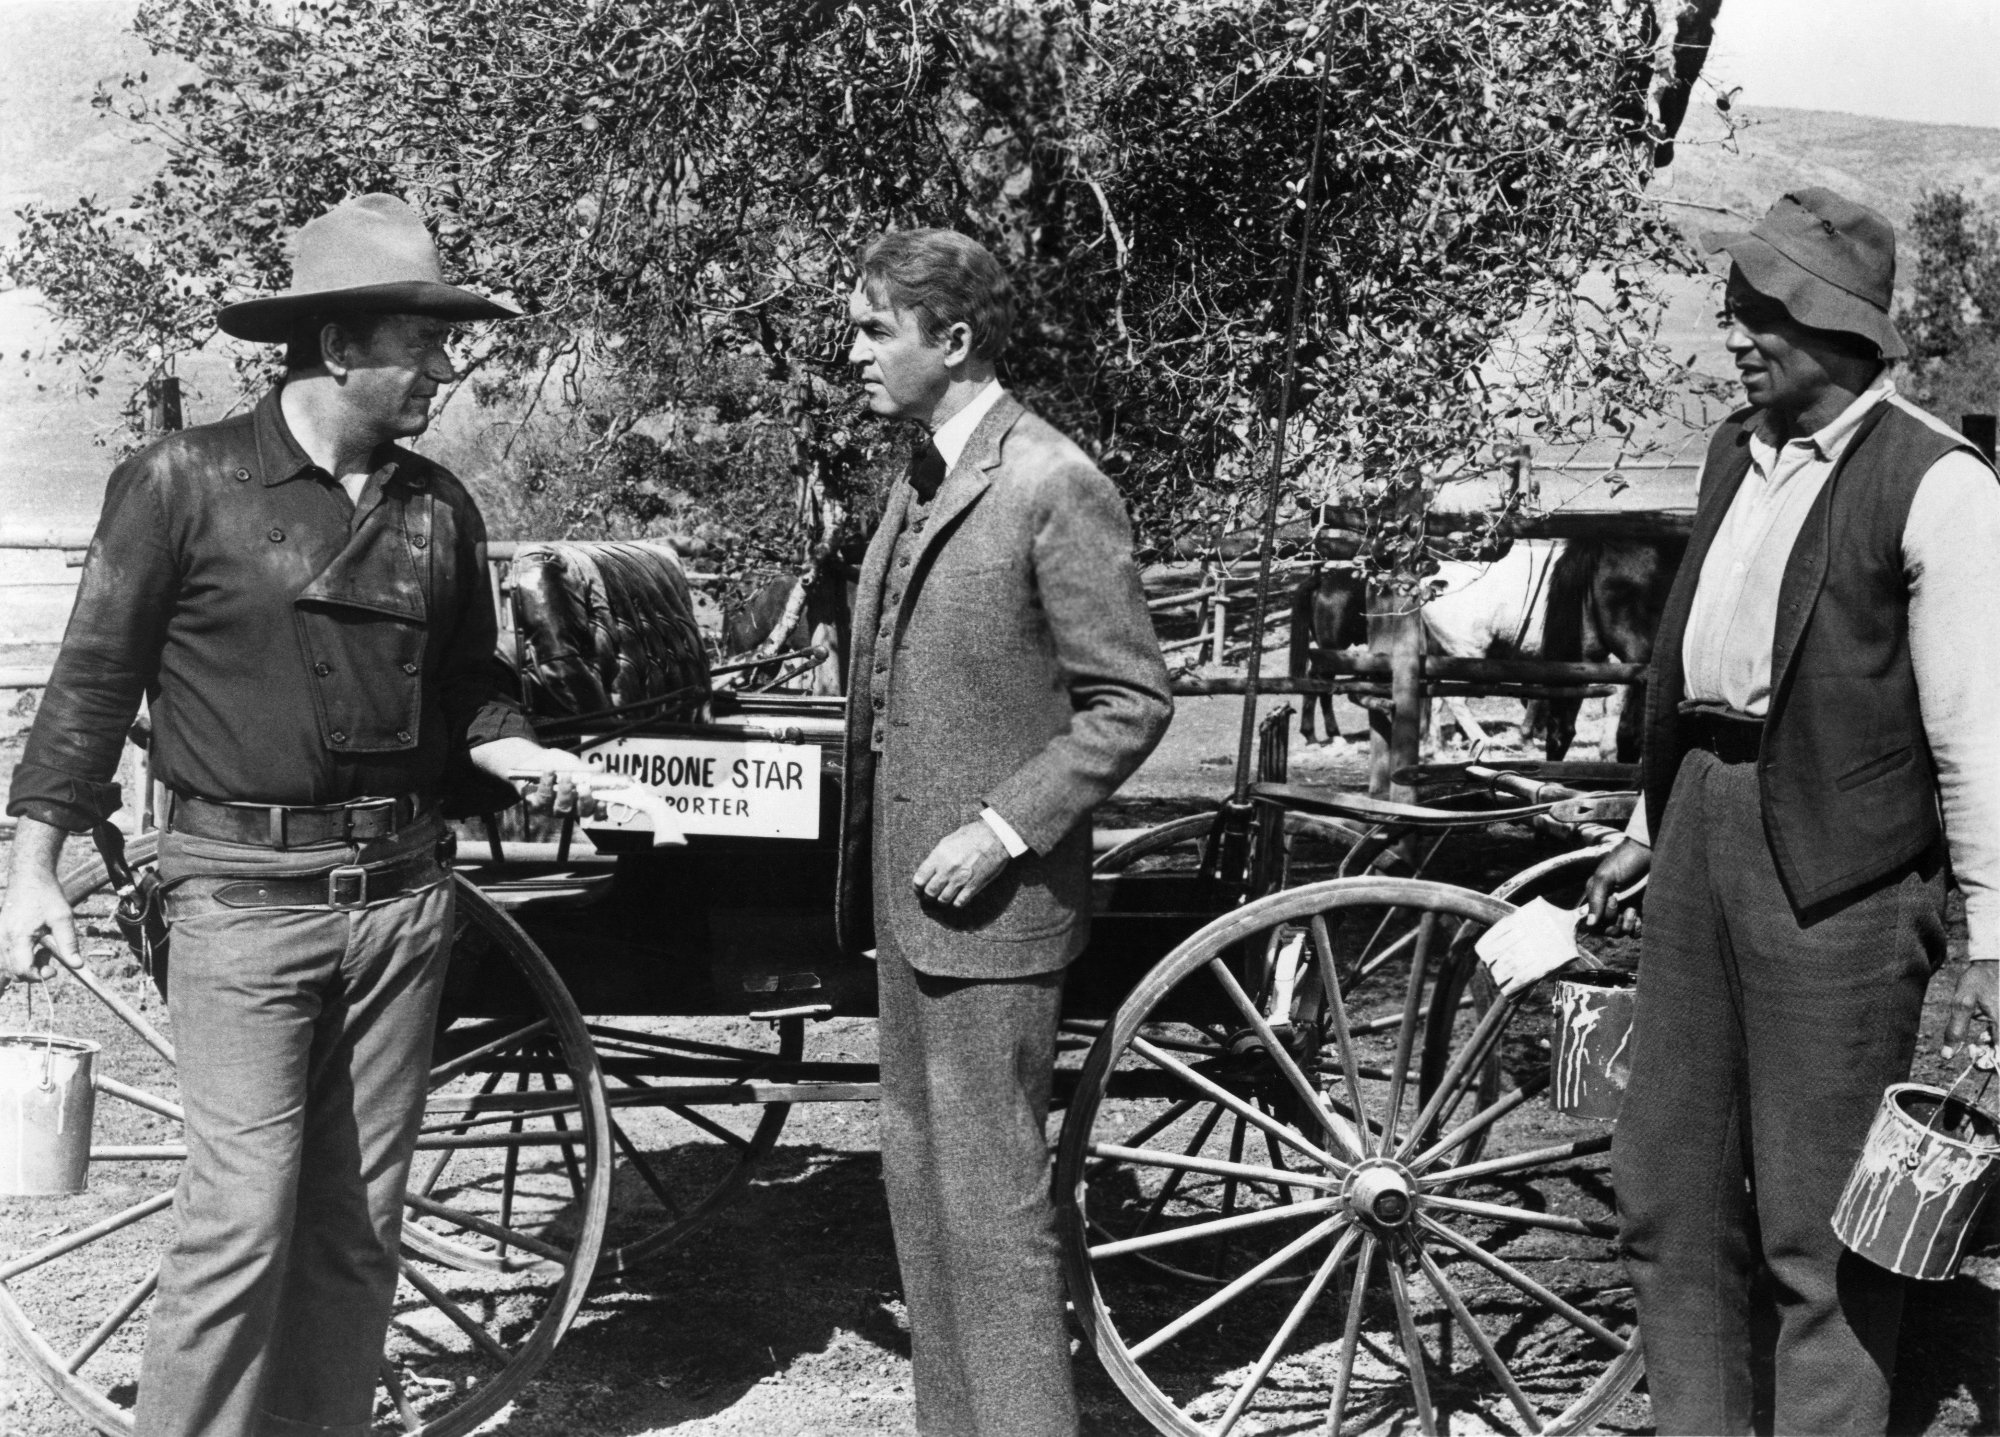 'The Man Who Shot Liberty Valance' John Wayne as Tom Doniphon, Jimmy Stewart as Ransom Stoddard, and Woody Strode as Pompey standing in front of a wagon and a tree in Western clothes